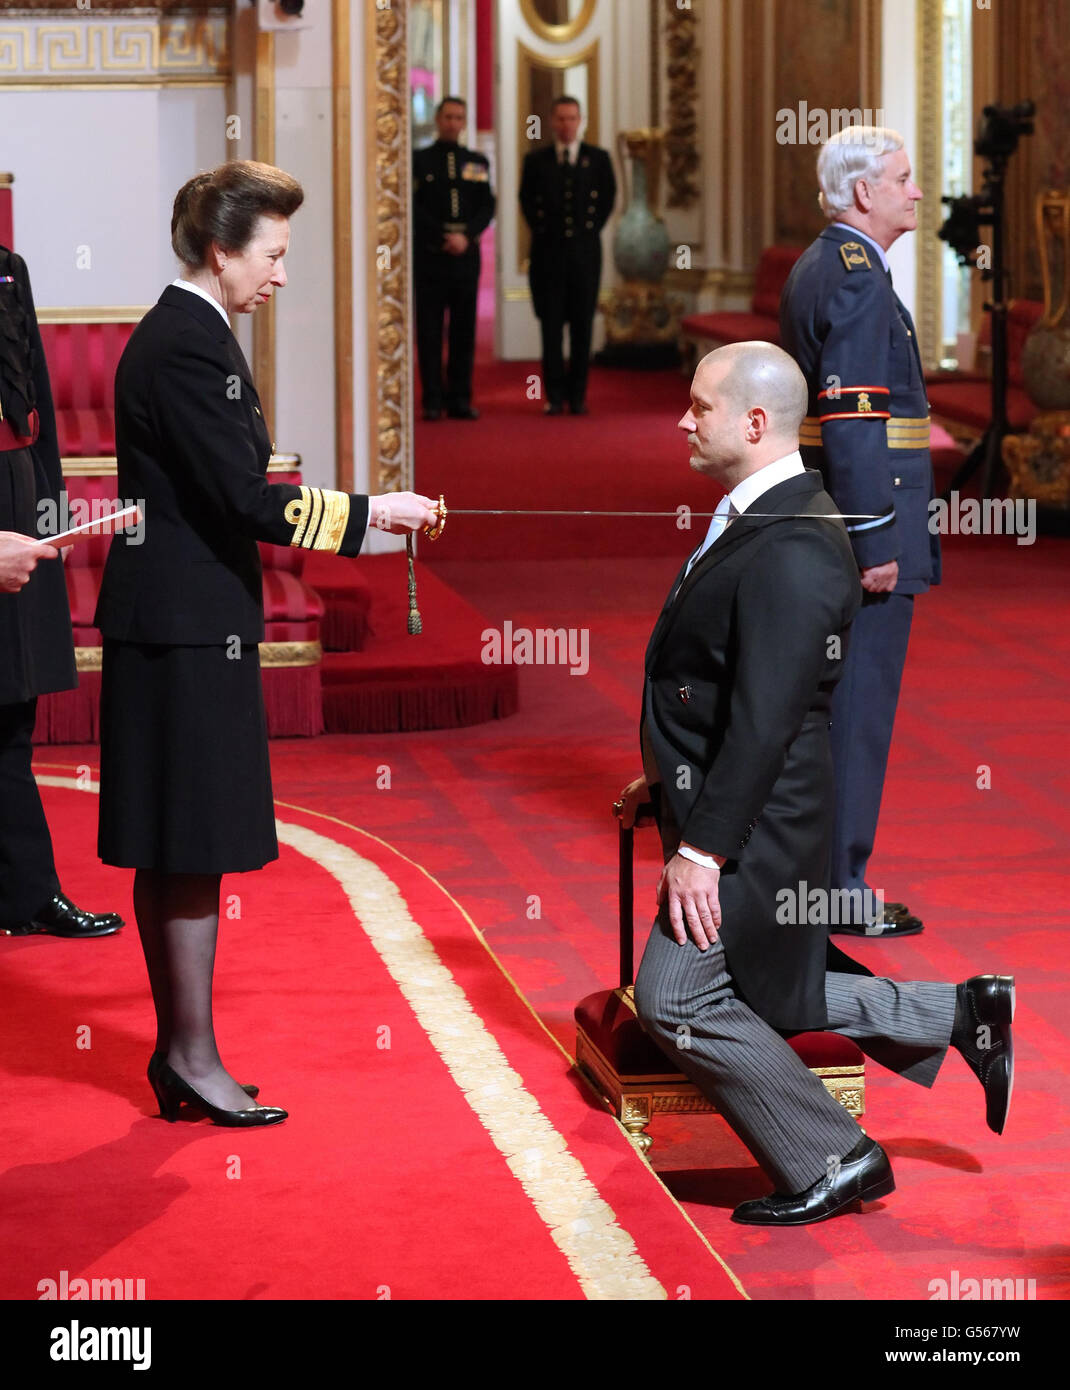 Senior Vice President, Apple Design Inc Sir Jonathan Ive is Knighted by The Princess Royal during an Investiture ceremony at Buckingham Palace. London. Stock Photo